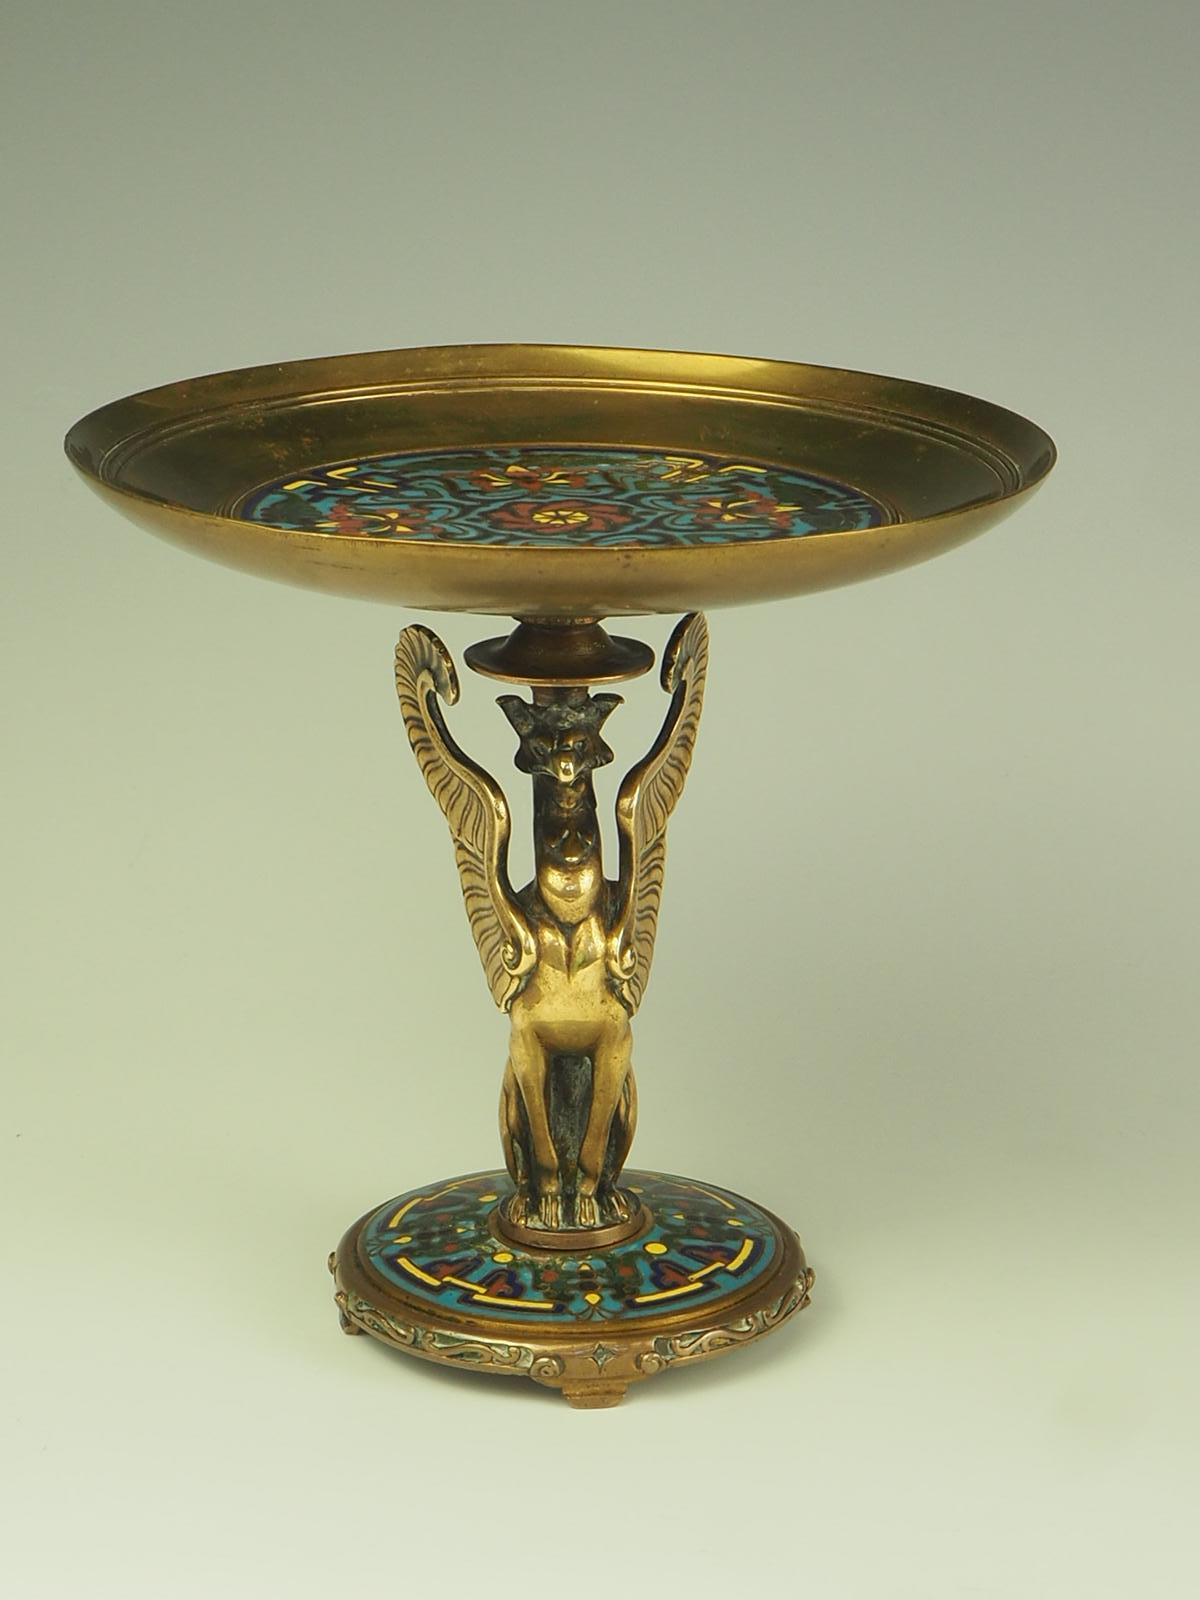 Artwork by Ferdinand Barbedienne (1810-1892) Tazza Dish

The enamel work has an Oriental decorative style with ottoman/ middle estern motifs

The tazza / dish is supported by a nicely detailed Griffin

Stamped Ferdinand Barbedienne

Artist